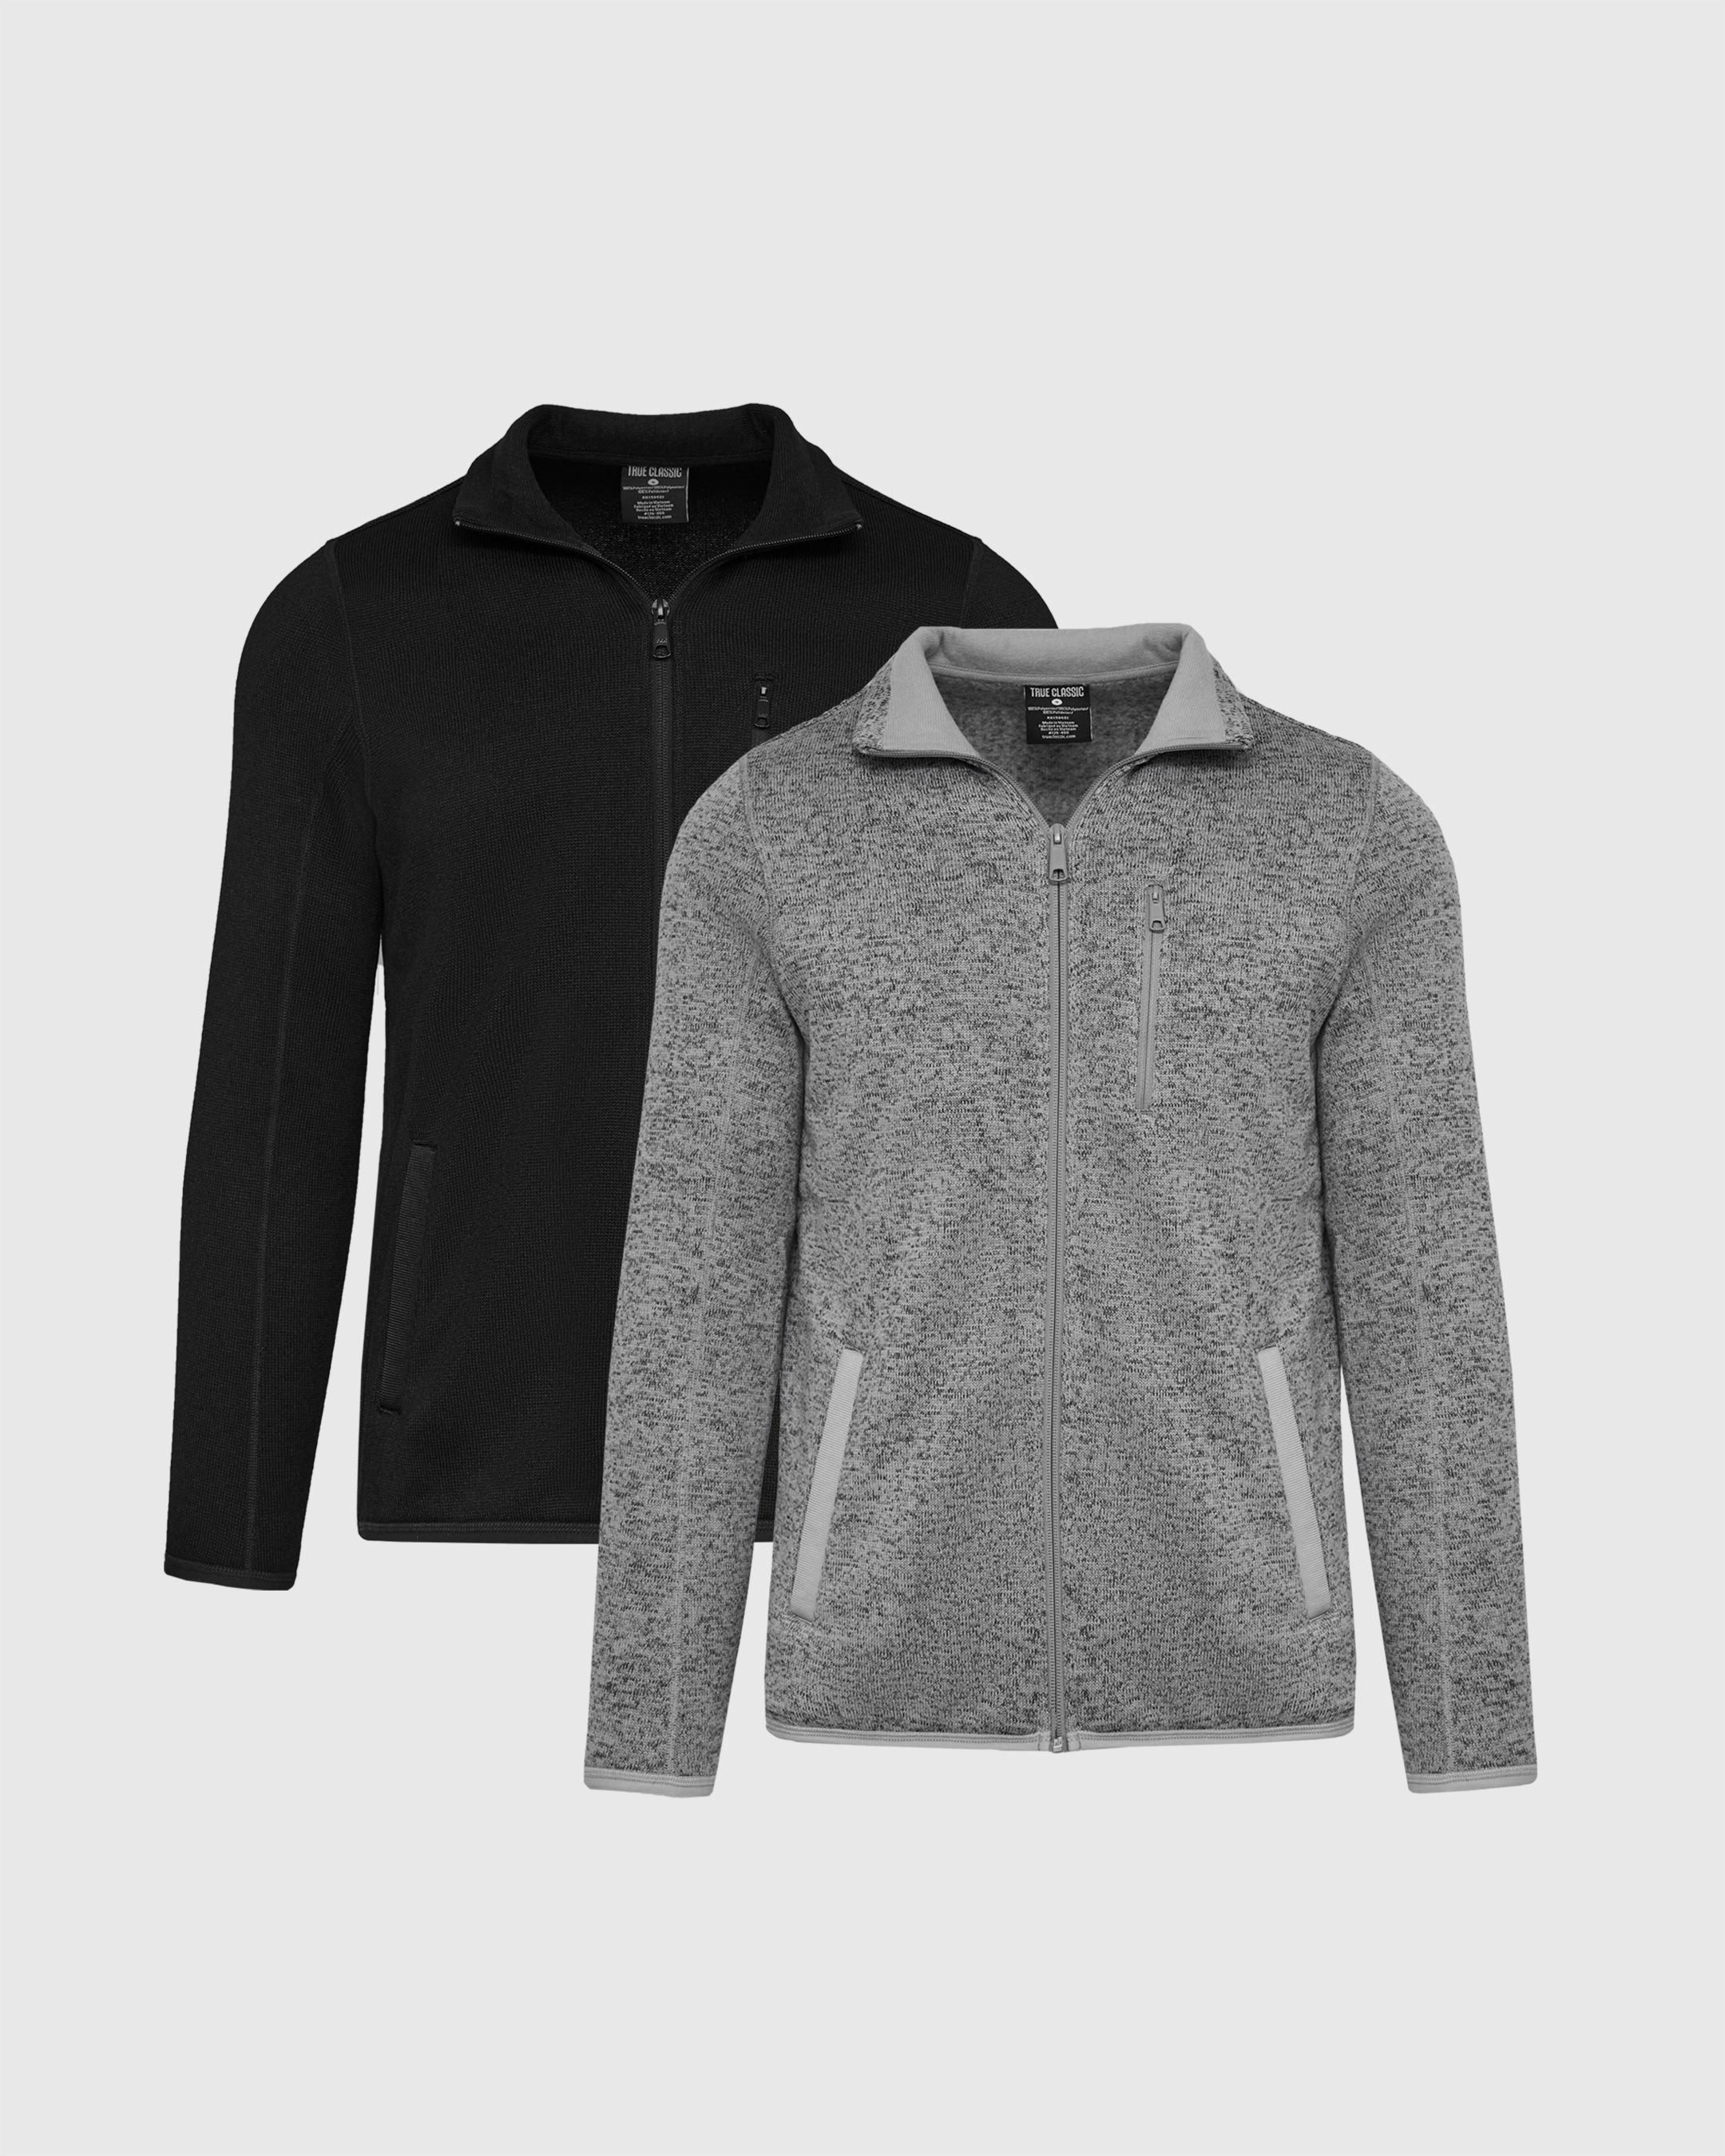 Black and Gray Sweater Fleece Jacket 2-Pack | True Classic